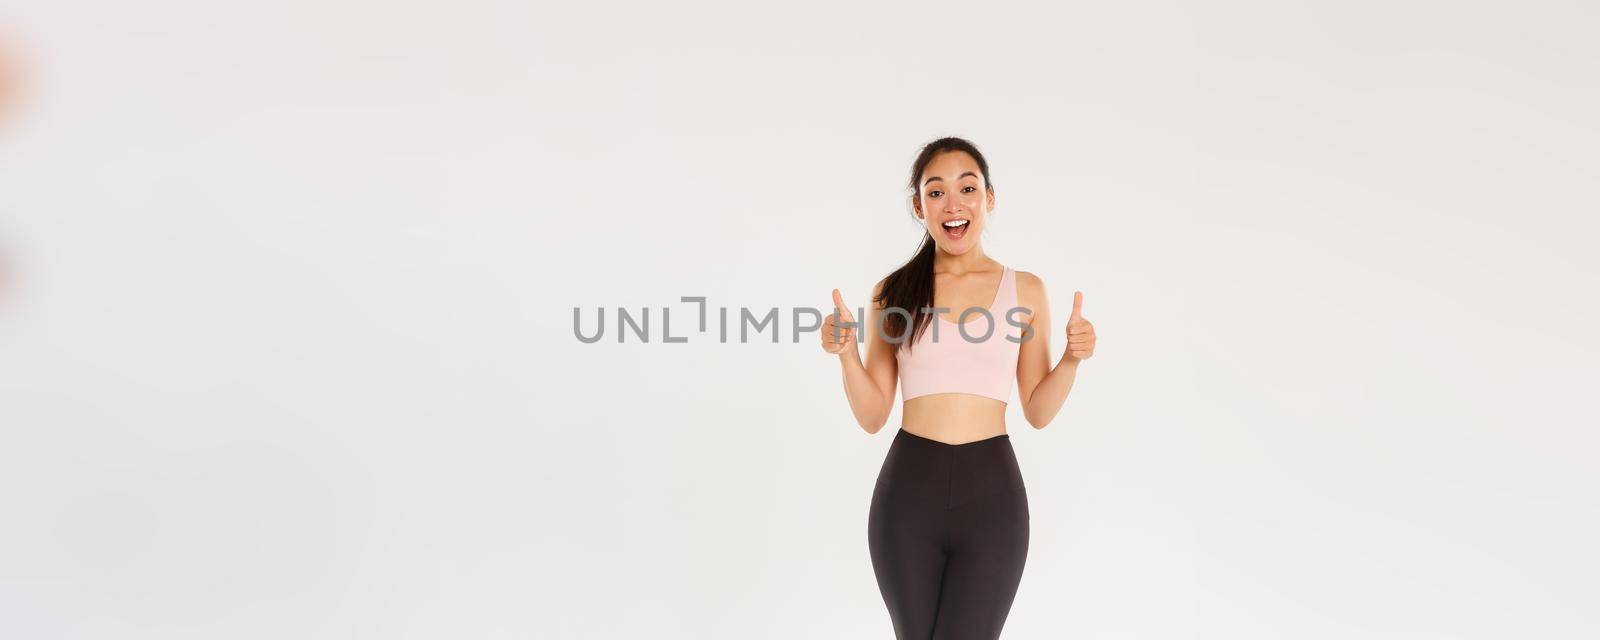 Full length of amazed and satisfied smiling fitness girl, female athelte in active wear liking new gym or workout program, showing thumbs-up pleased, encourage start training or doing exercises.